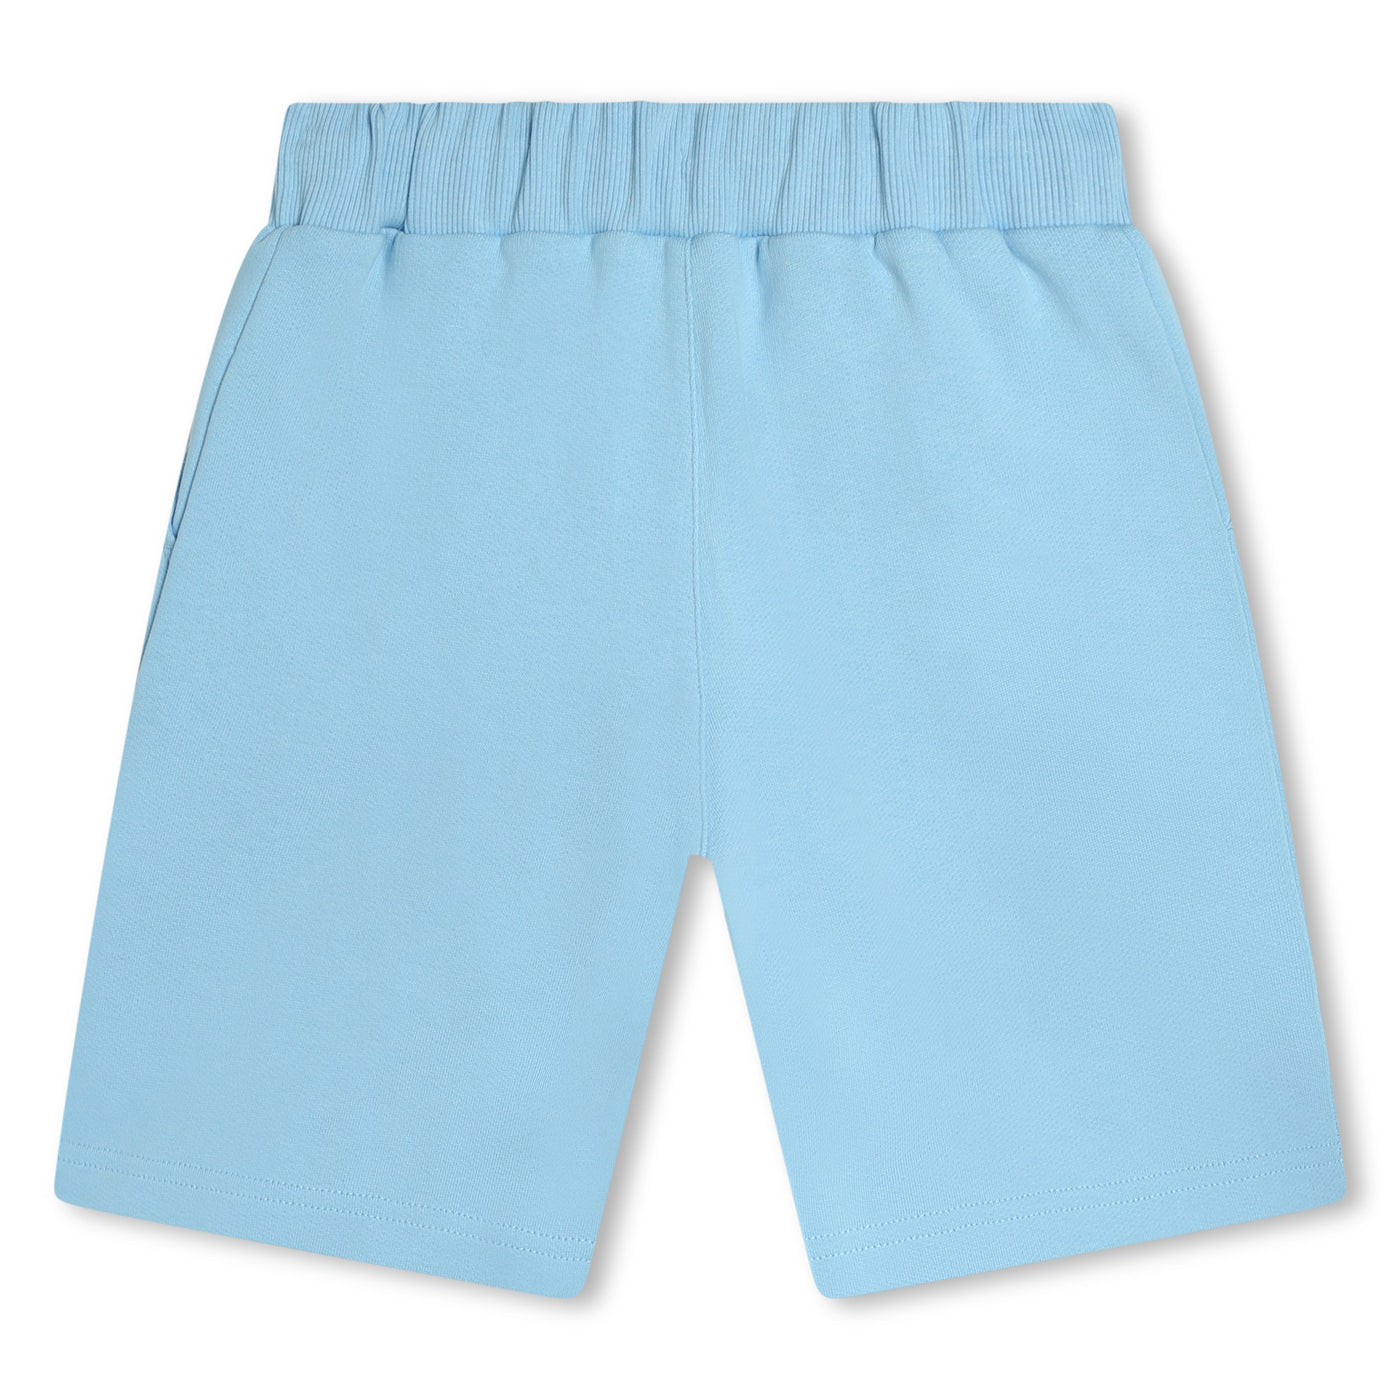 Pale Blue Shorts by Kenzo